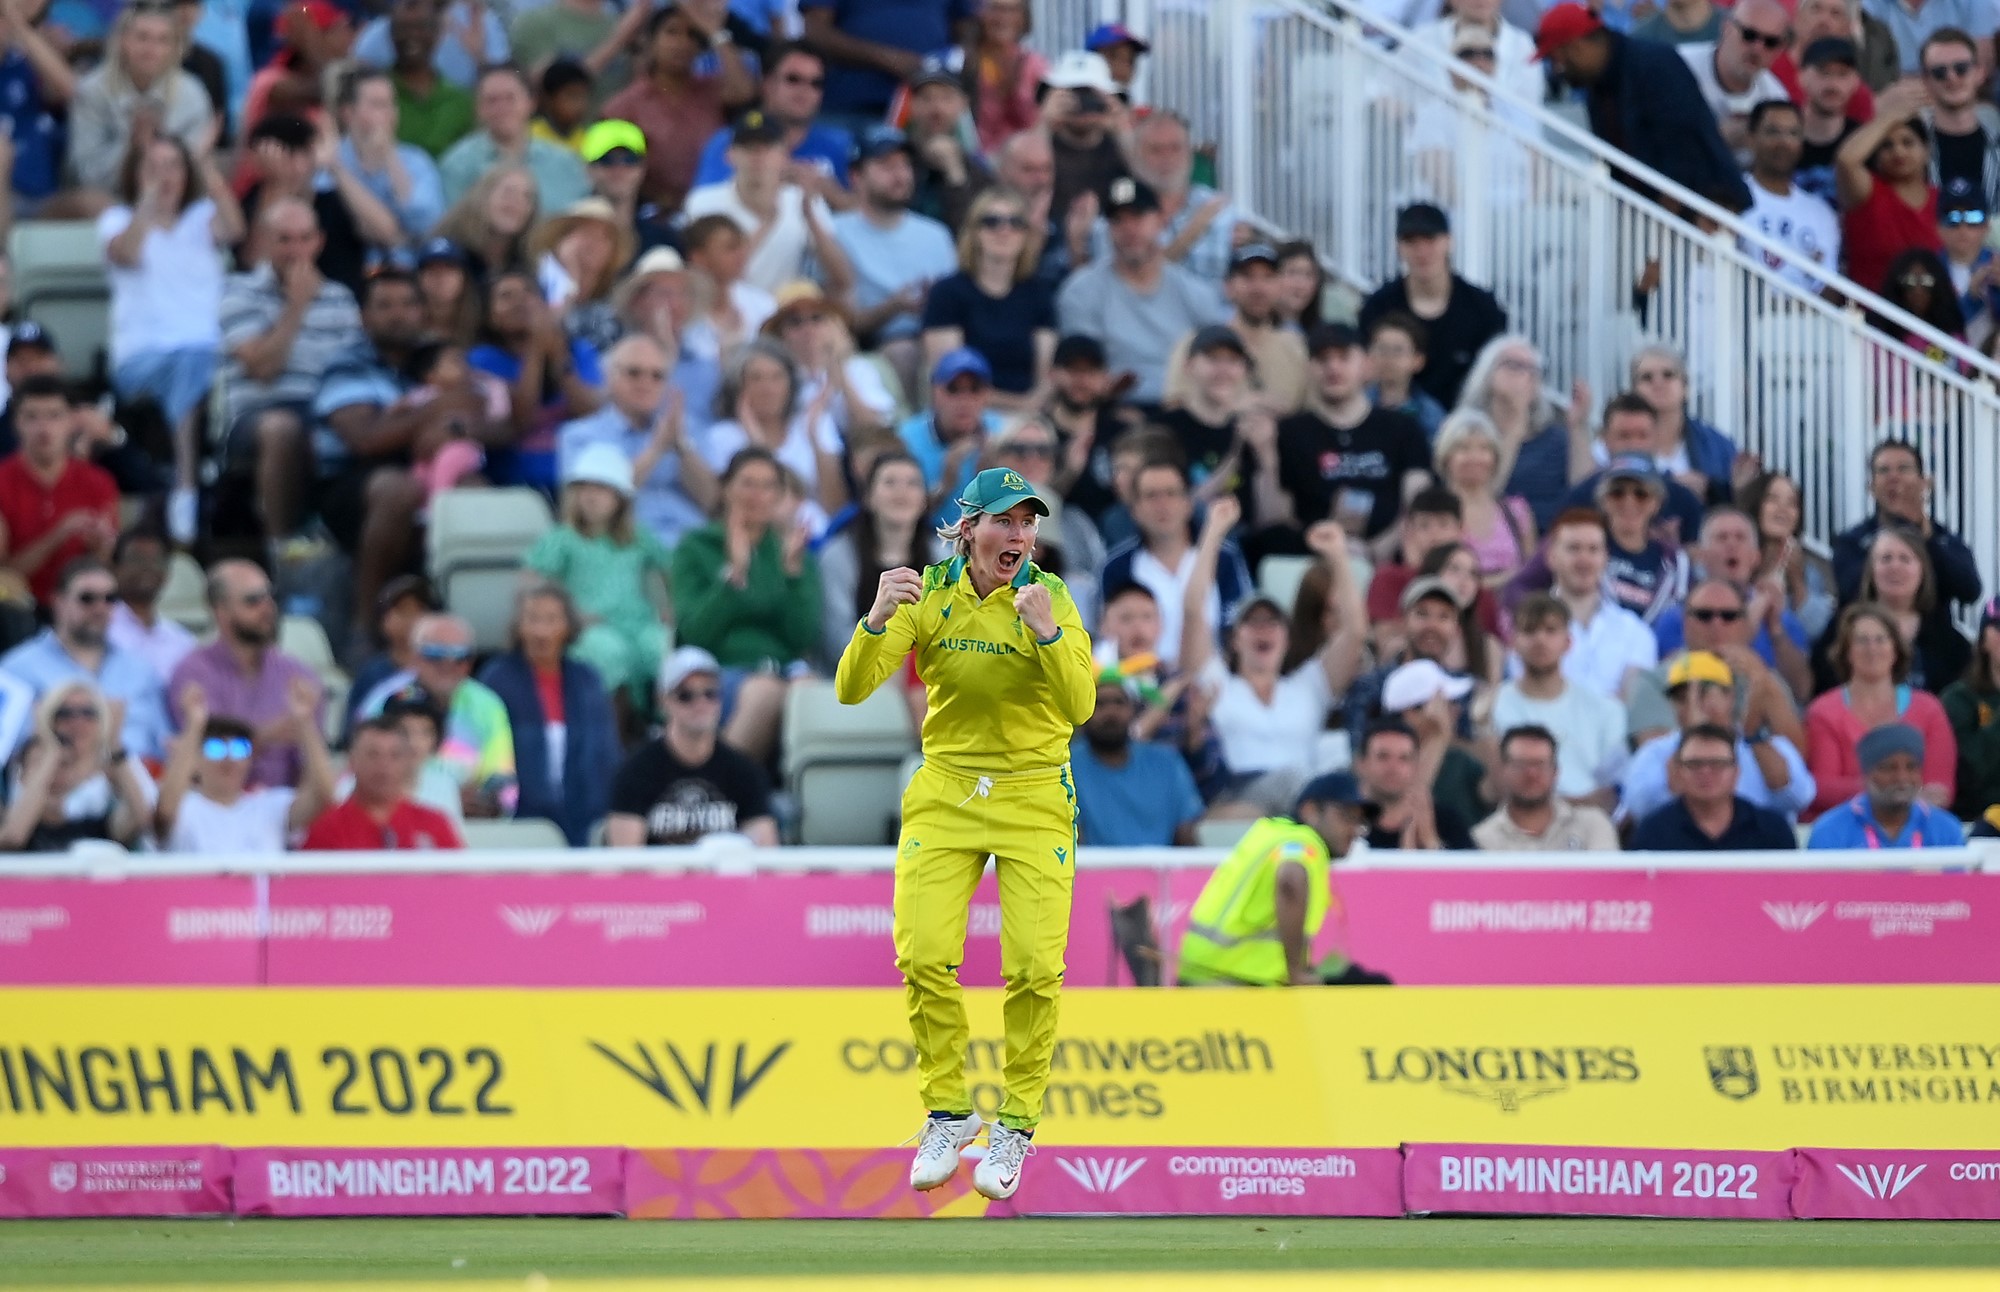 Beth Mooney celebrates a catch in front of the Edgbaston crowd in the Commonwealth Games cricket final.